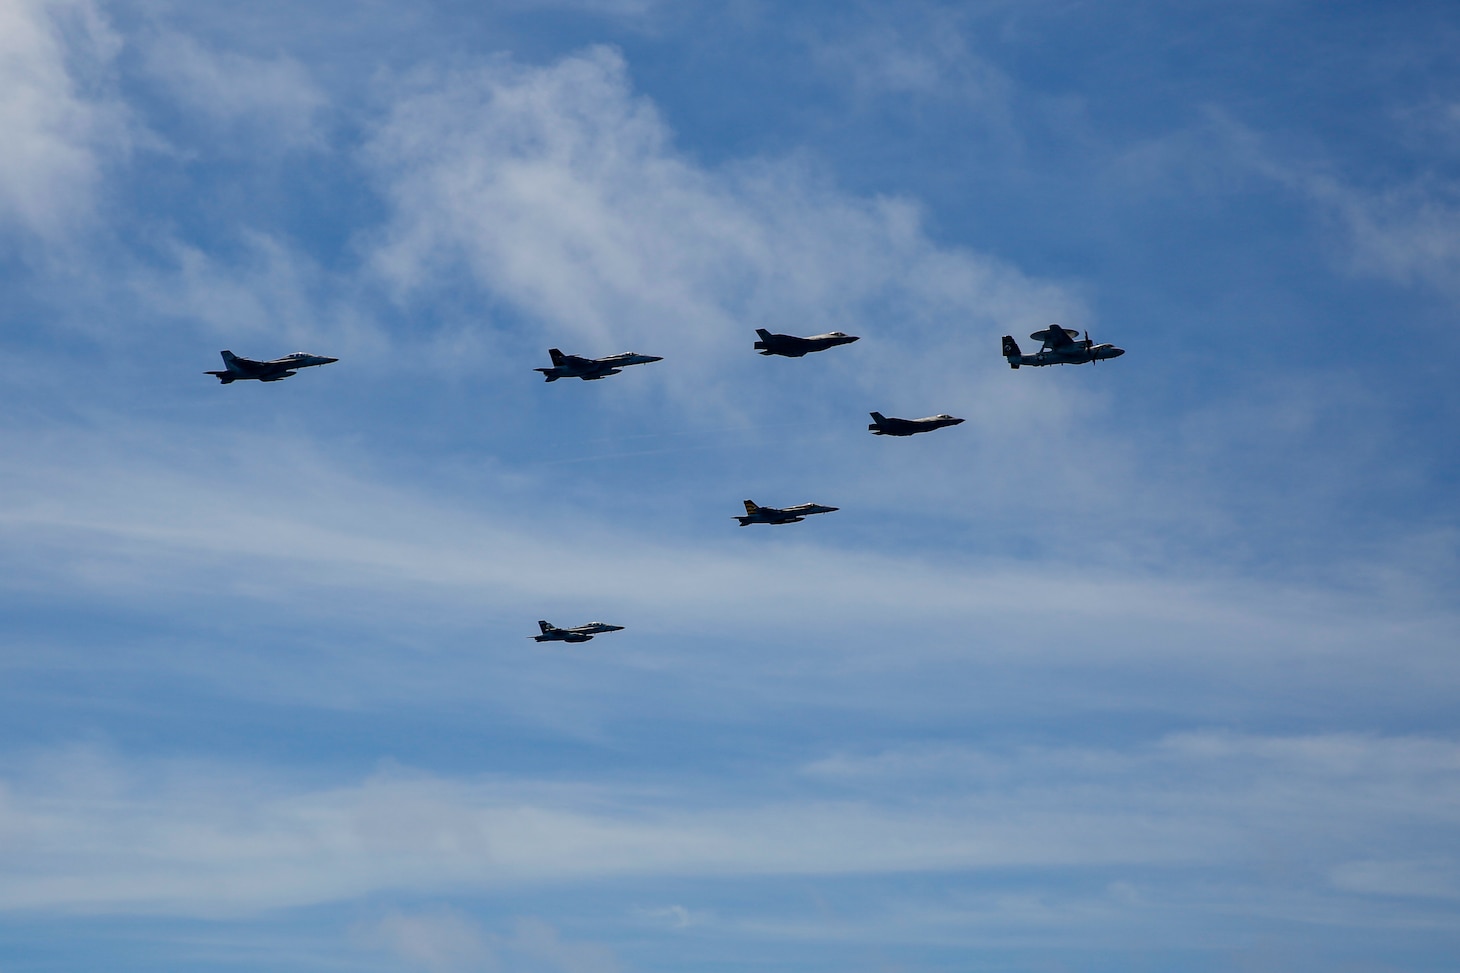 PHILIPPINE SEA (June 12, 2022) Aircraft from Carrier Air Wing (CVW) 9 fly in formation during Valiant Shield 2022 (VS22). VS22 is a U.S.-only, biennial field training exercise (FTX) focused on integration of joint training in a multi-domain environment. This training builds real-world proficiency in sustaining joint forces through detecting, locating tracking, and engaging units at sea, in the air, on land, and in cyberspace in response to a range of missile areas. (U.S. Navy photo by Mass Communication Specialist 3rd Class Michael Singley)